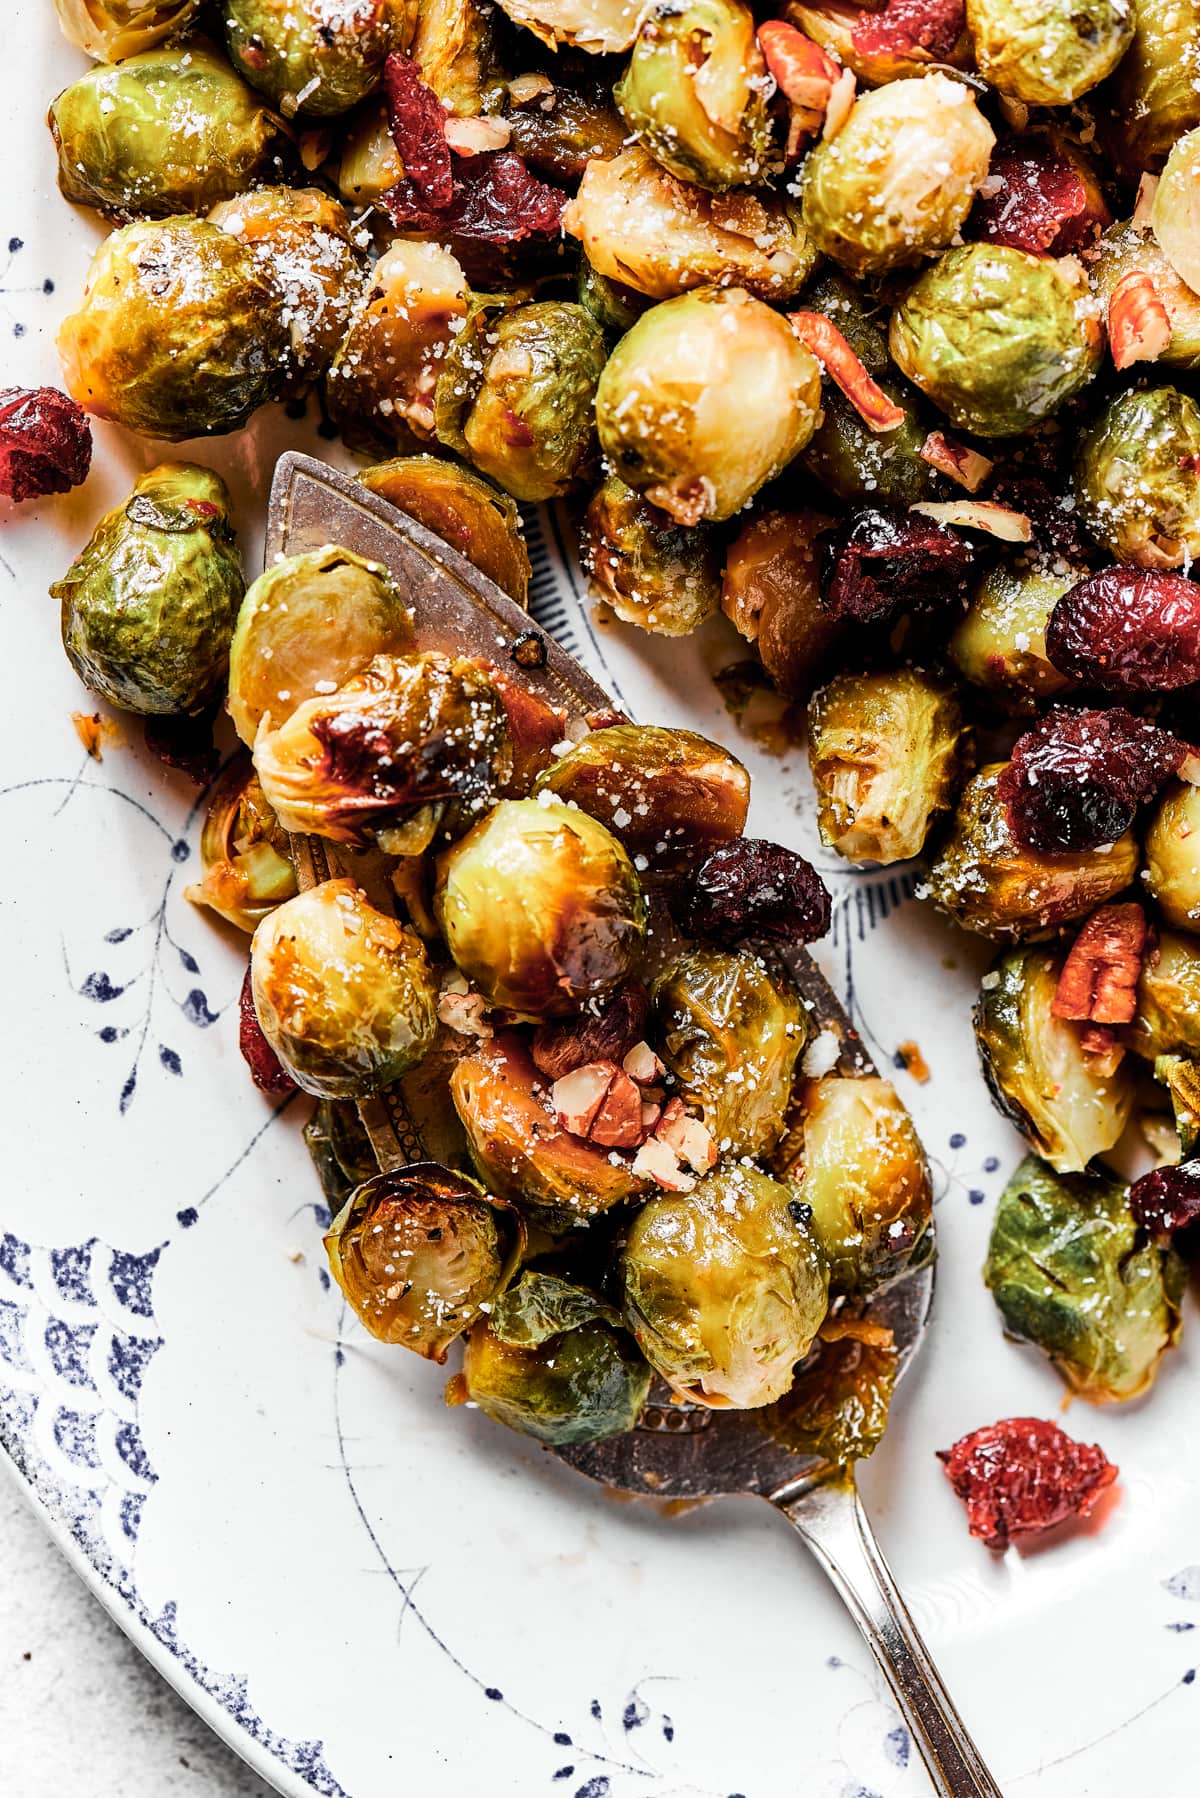 Roasted Brussels sprouts on a serving plate.